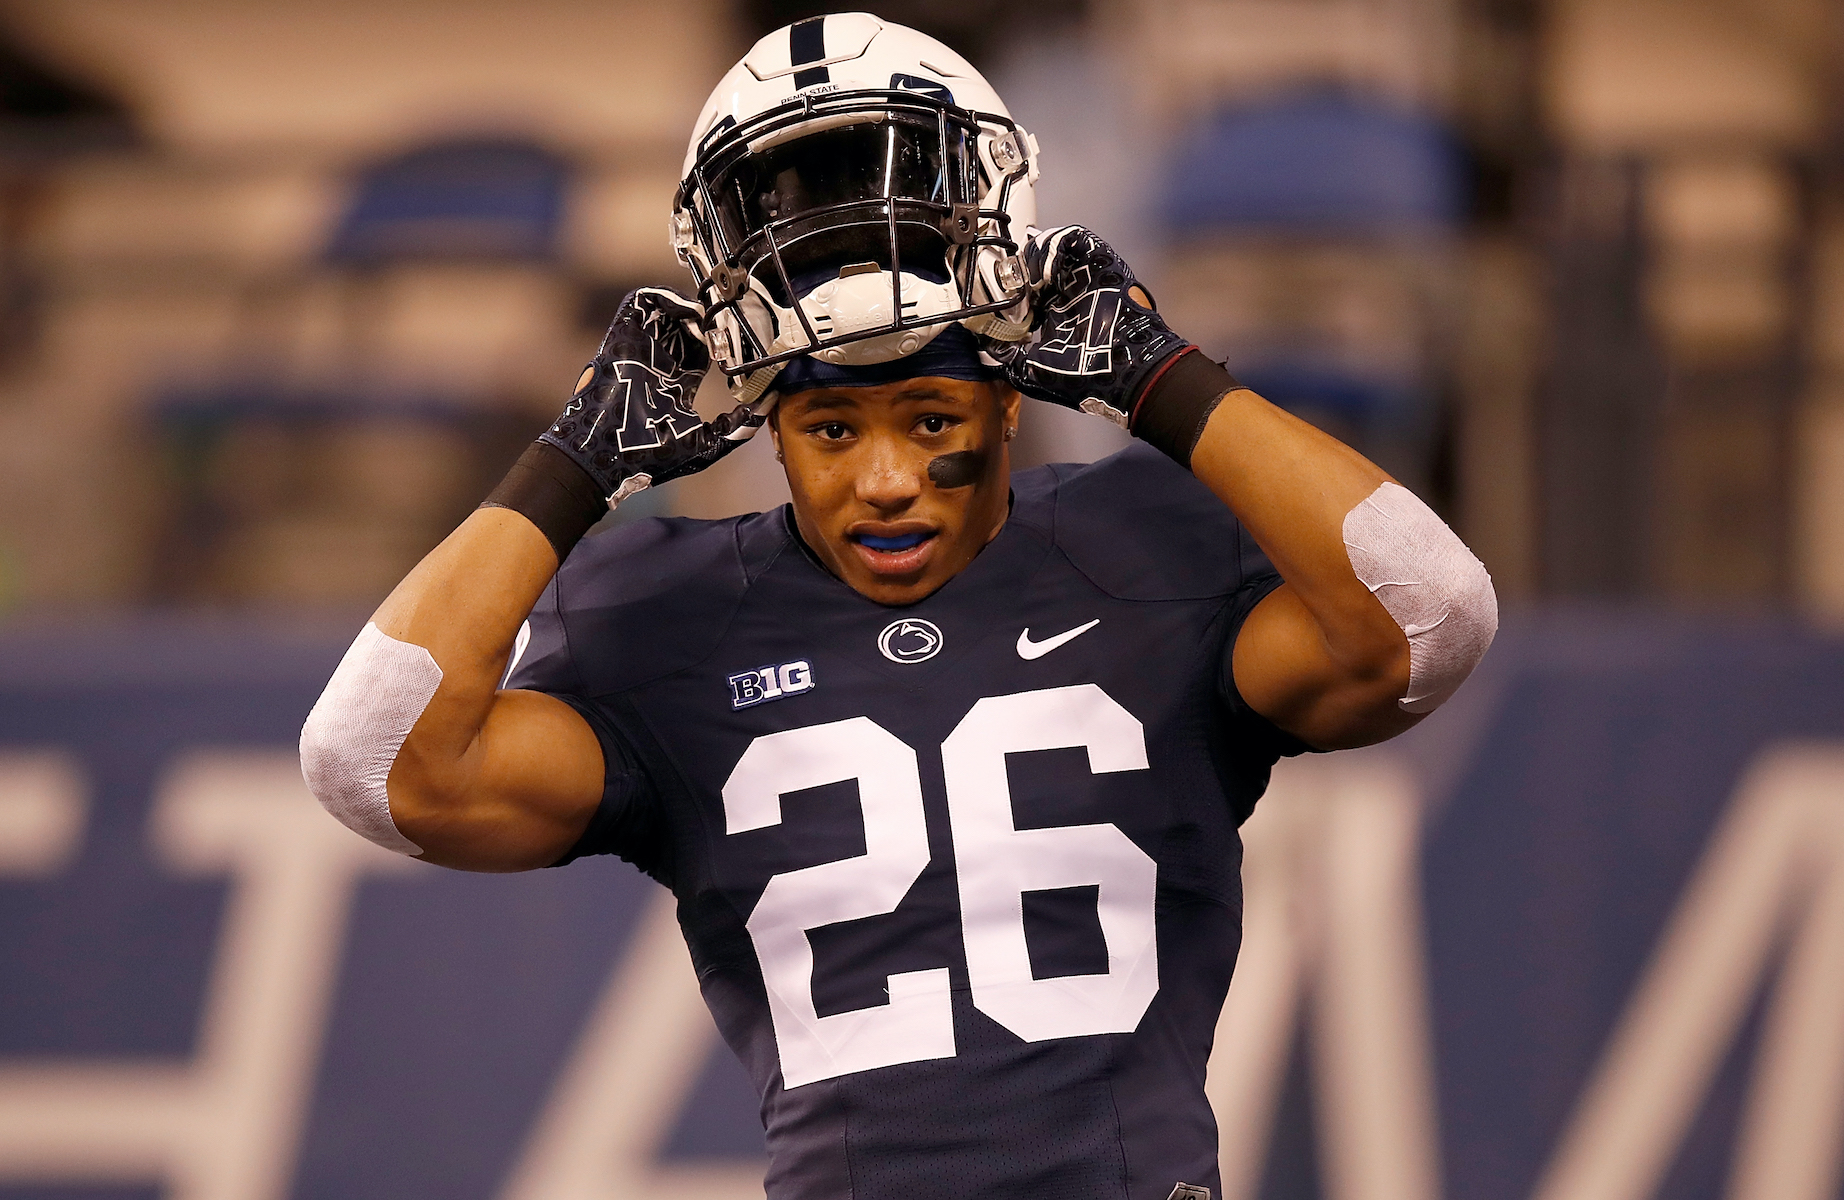 The Hardest Decision Saquon Barkley Has Had to Make: ‘I Was Going Against My Word’